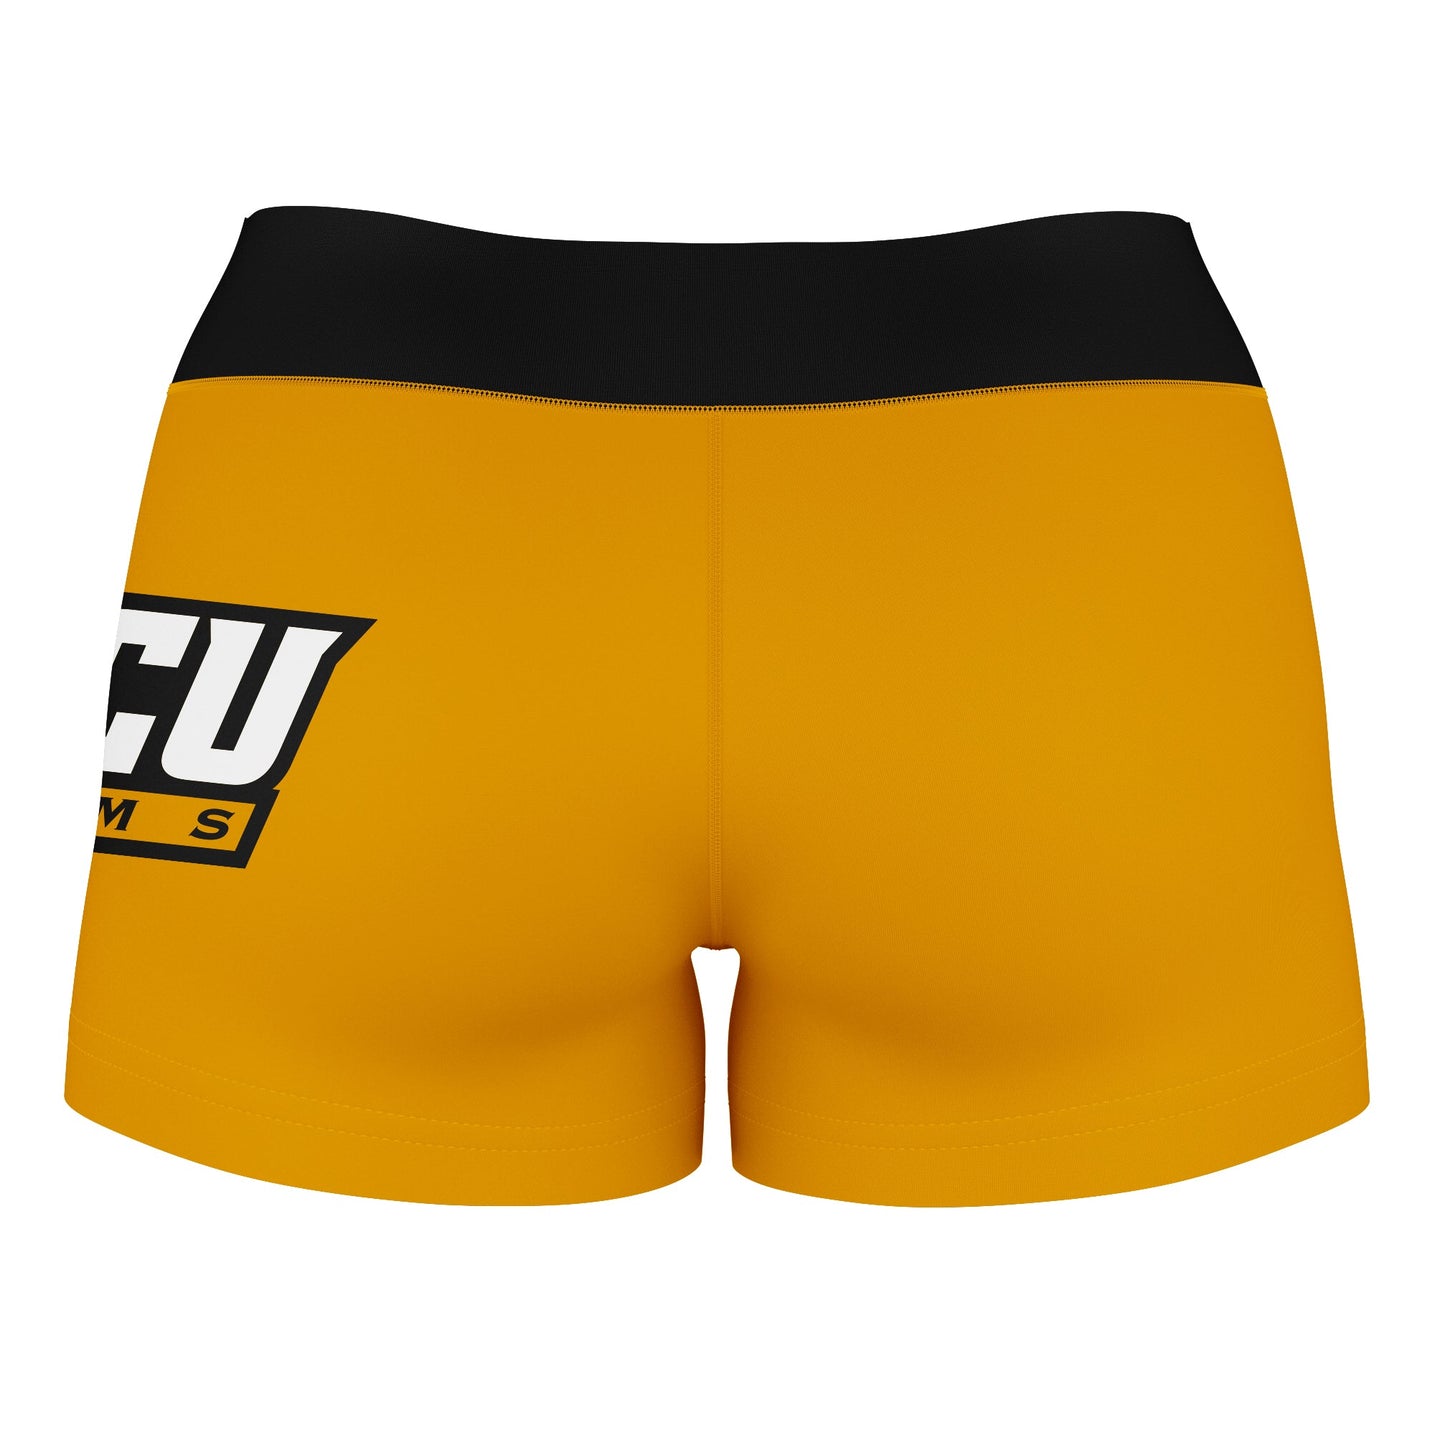 VCU Rams Virginia Commonwealth Logo on Thigh & Waistband Maroon Gold Black Yoga Booty Workout Shorts 3.75 Inseam - Vive La F̻te - Online Apparel Store